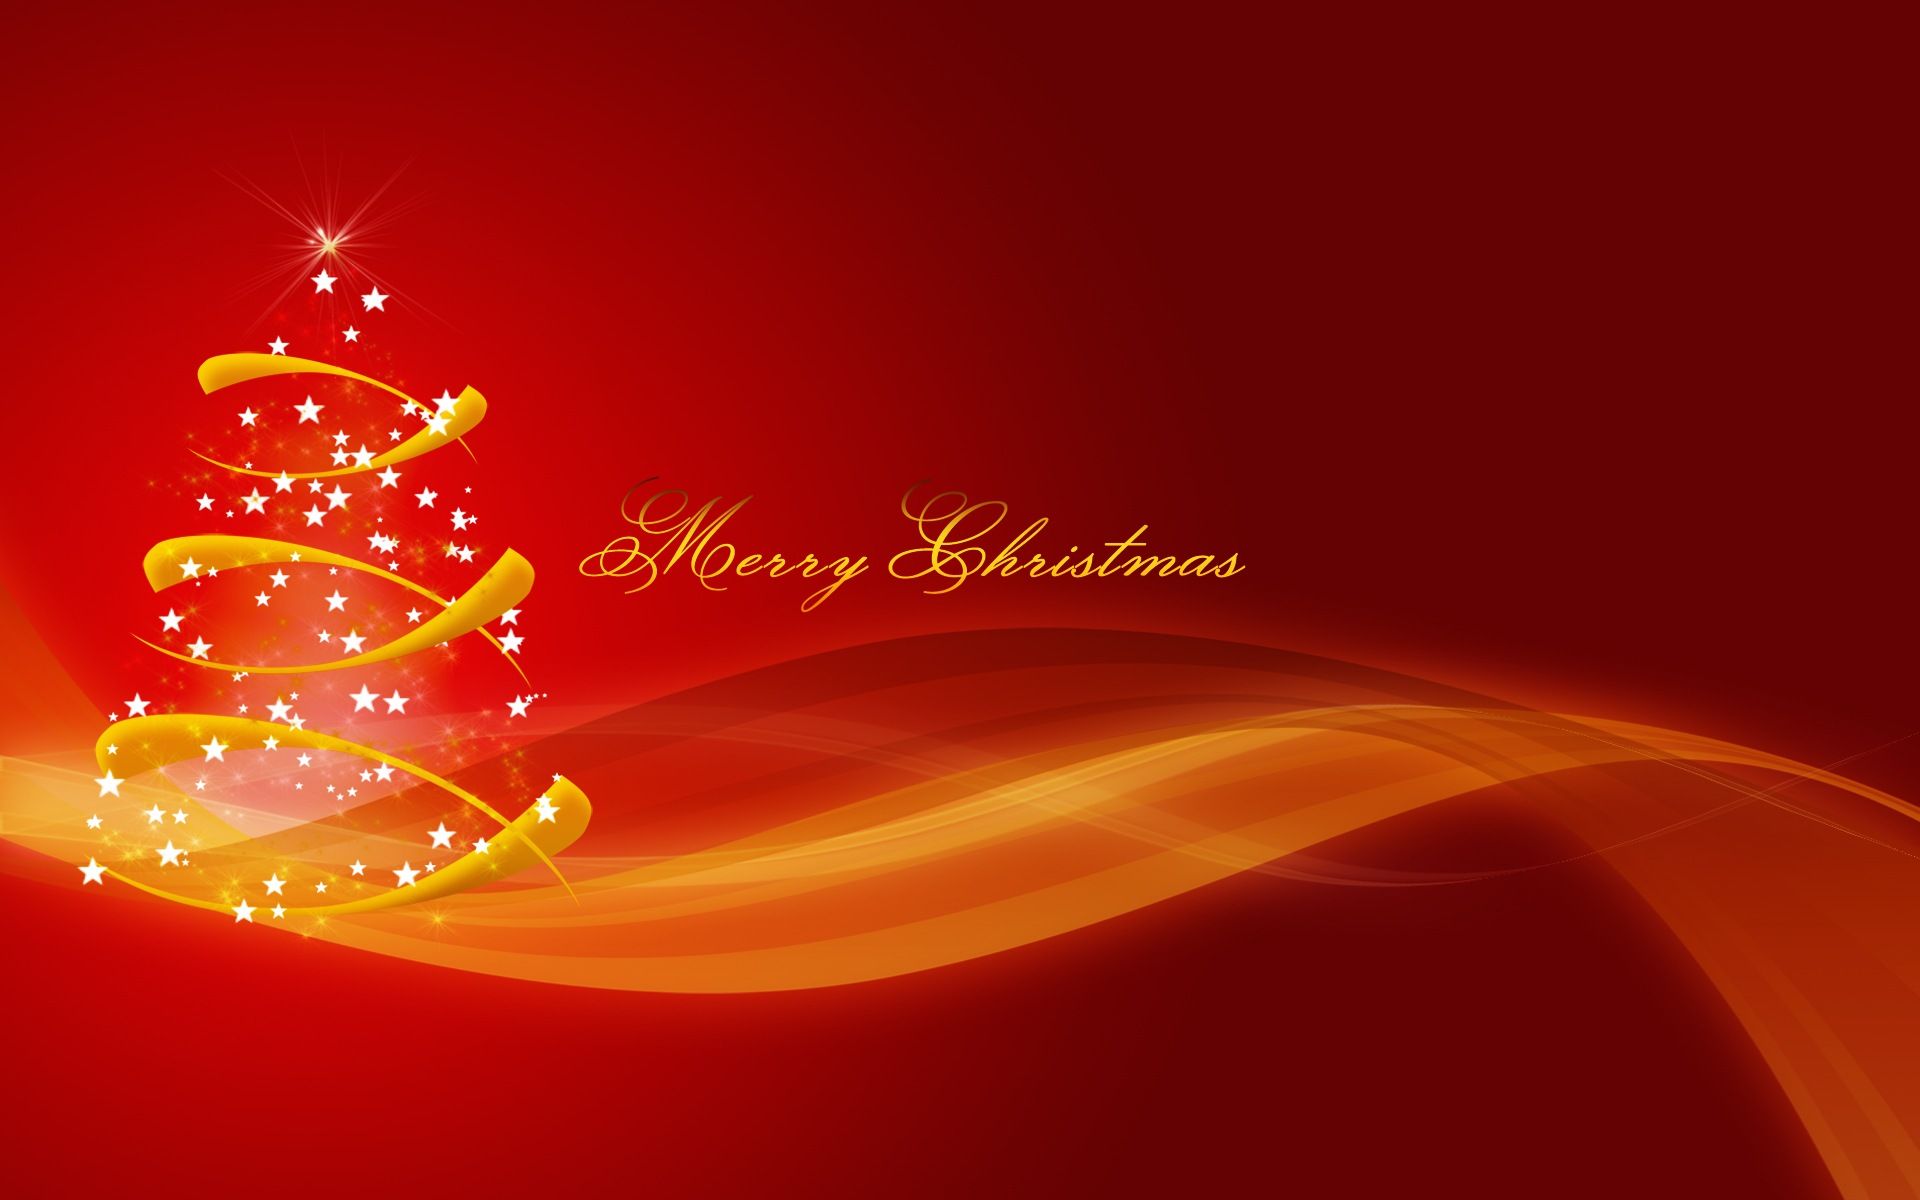 Merry Christmas, cool, backround wallpaper. Merry Christmas, cool, backround